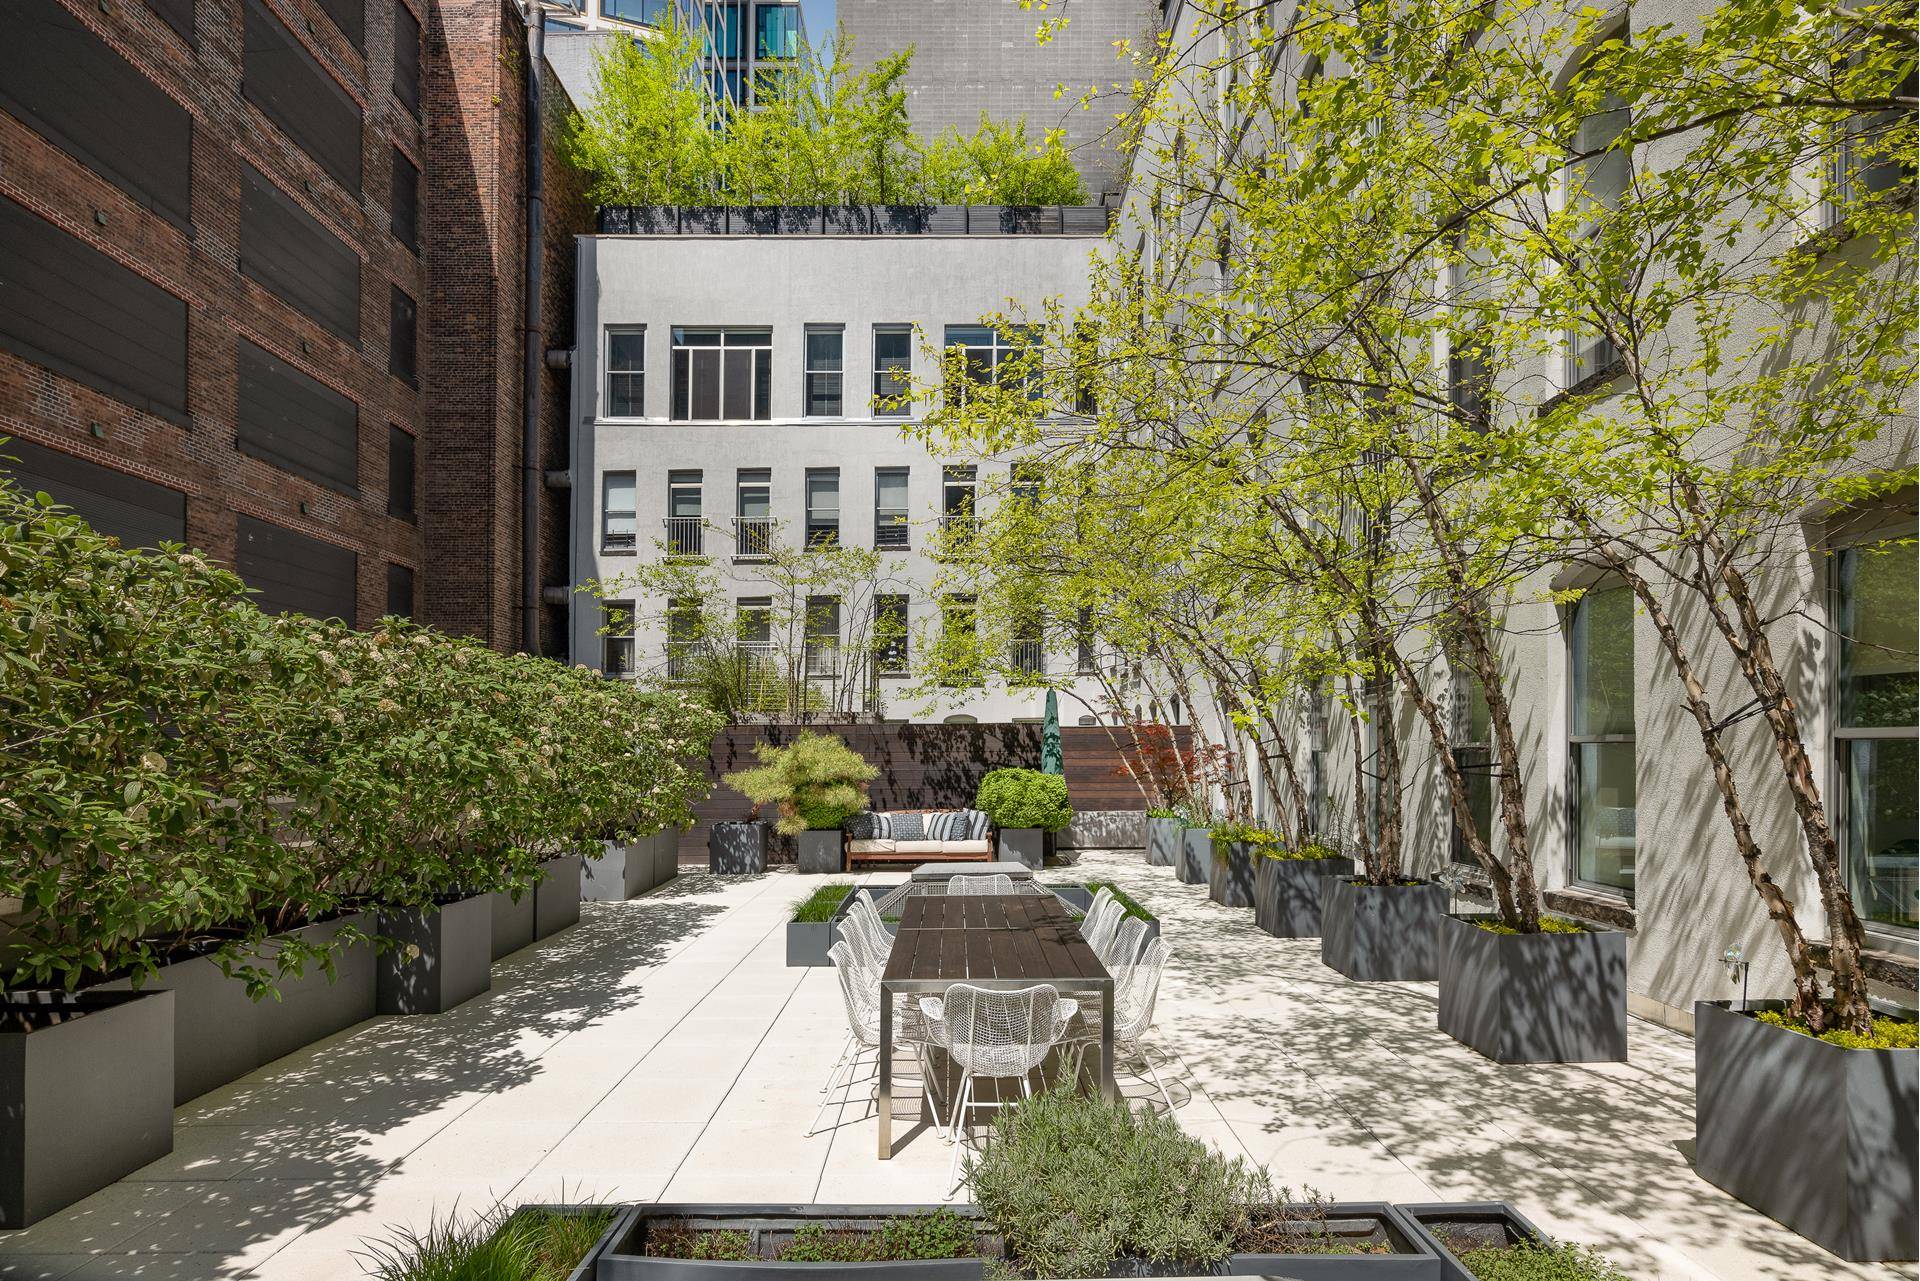 Indoor outdoor living and true grandeur, scale and serenity await at this perfect West Chelsea pre war condominium residence with one of the largest private terraces downtown.